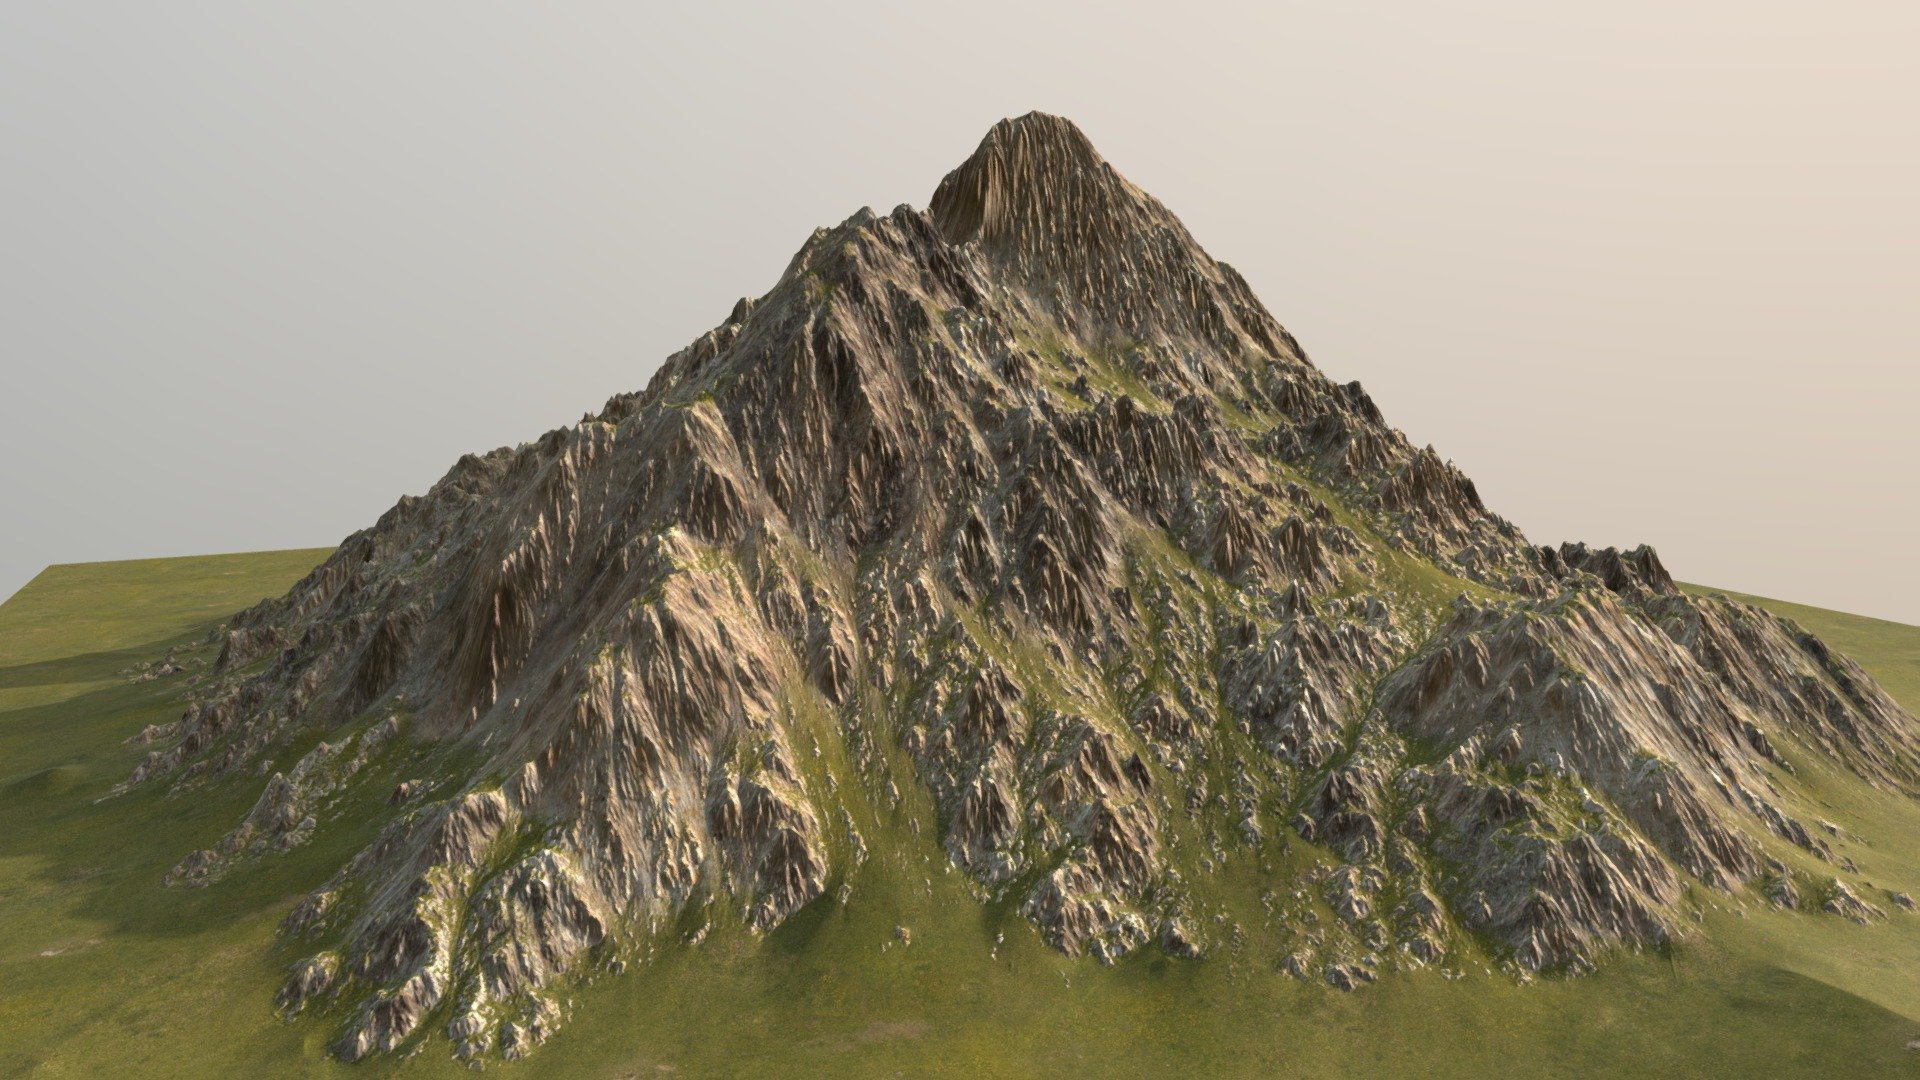 Mountain/Island with 4k textures
you can translate, rotate, scale and duplicate to create awesome scenes and landscape for your renders/games
Included 4k Texture :-
Albedo/Diffuse
Normal
Height/Displacement
Roughness
Updated Additional Files - Rocky Mountain - Buy Royalty Free 3D model by Nicholas-3D (@Nicholas01) 3d model